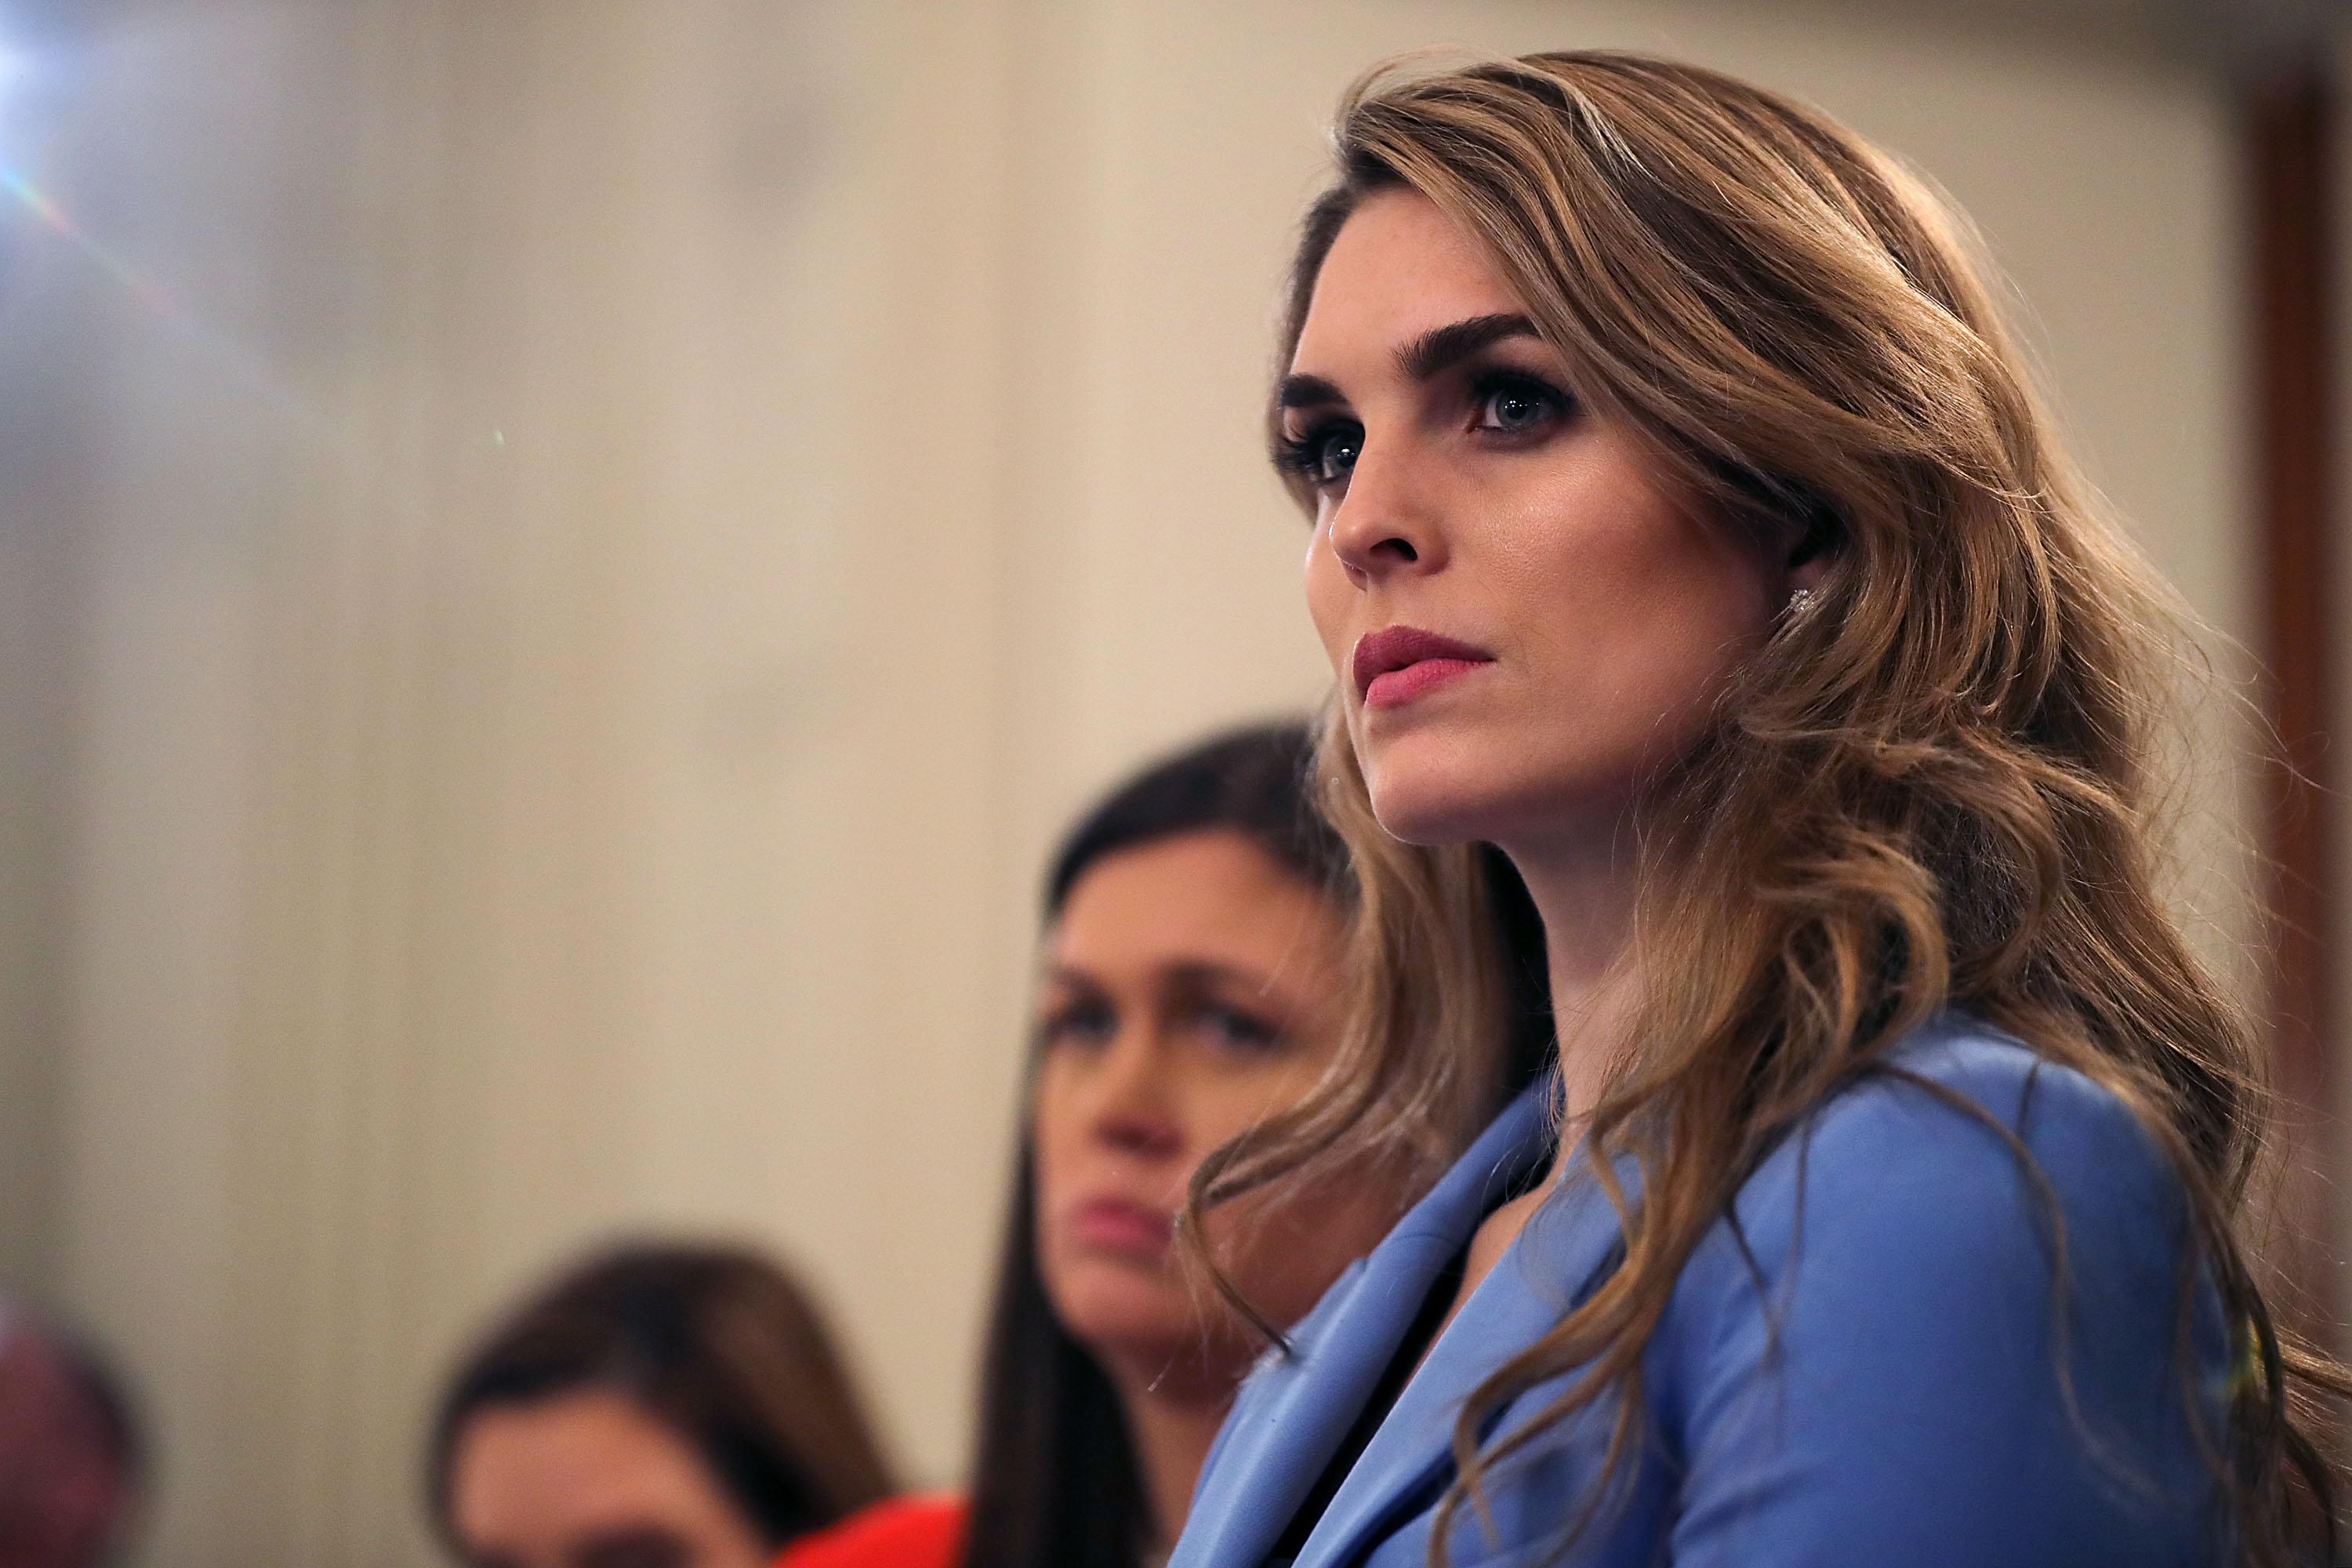 WASHINGTON, DC - FEBRUARY 21:  (AFP OUT) White House Communications Director Hope Hicks attends a listening session hosted by U.S. President Donald Trump with student survivors of school shootings, their parents and teachers in the State Dining Room at the White House February 21, 2018 in Washington, DC. Trump is hosting the session in the wake of last week's mass shooting at Marjory Stoneman Douglas High School in Parkland, Florida, that left 17 students and teachers dead.  (Photo by Chip Somodevilla/Getty Images)